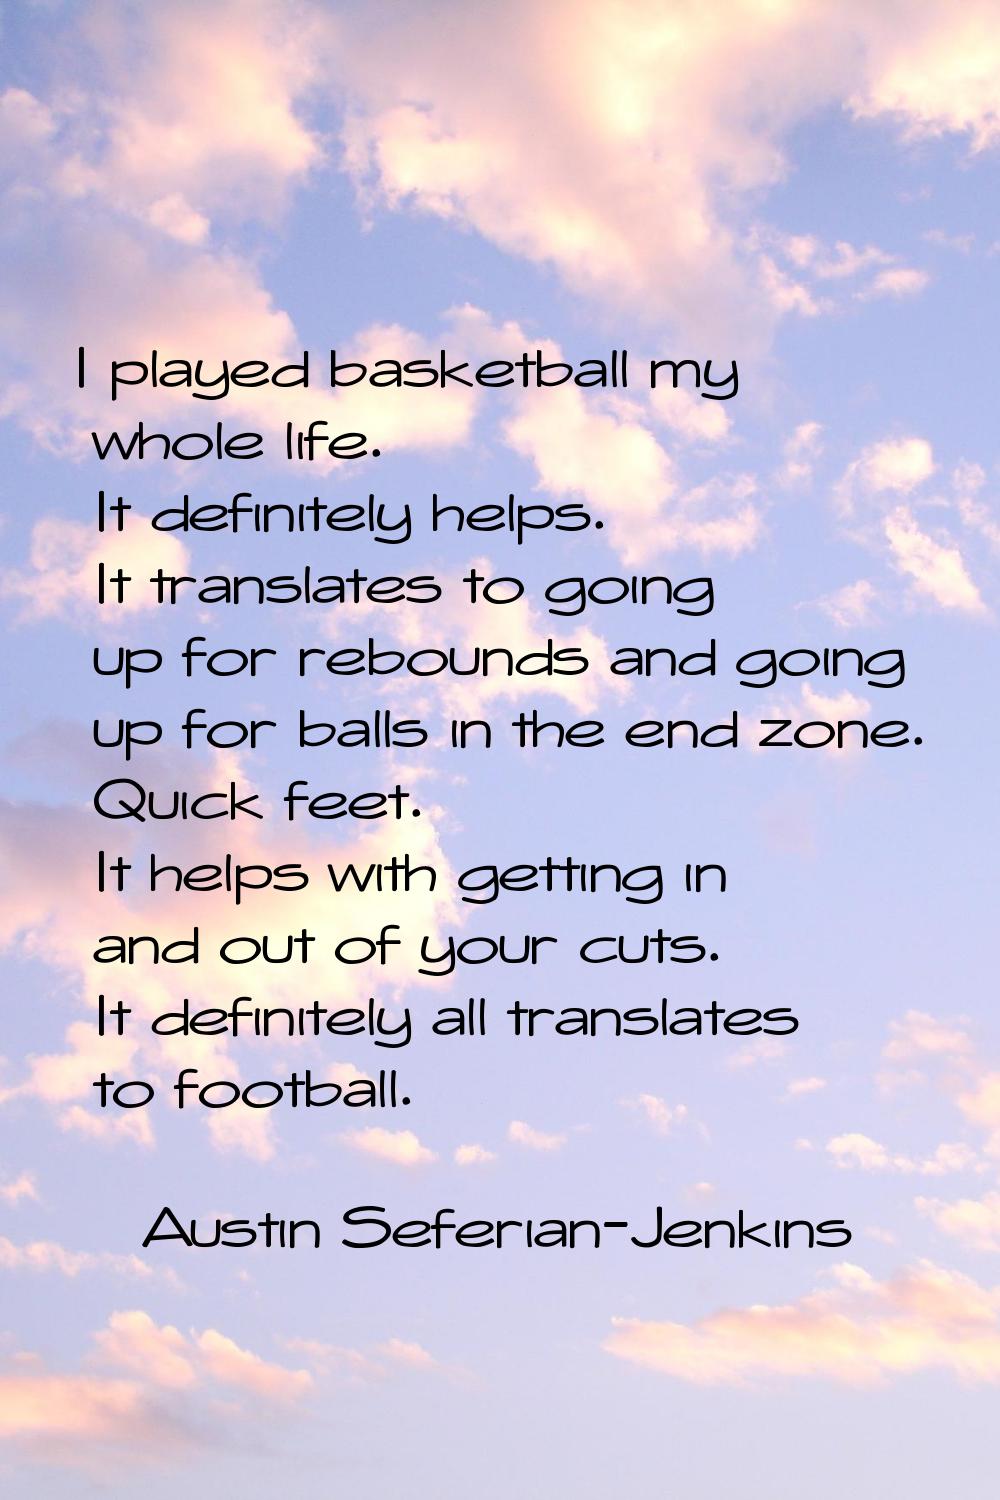 I played basketball my whole life. It definitely helps. It translates to going up for rebounds and 